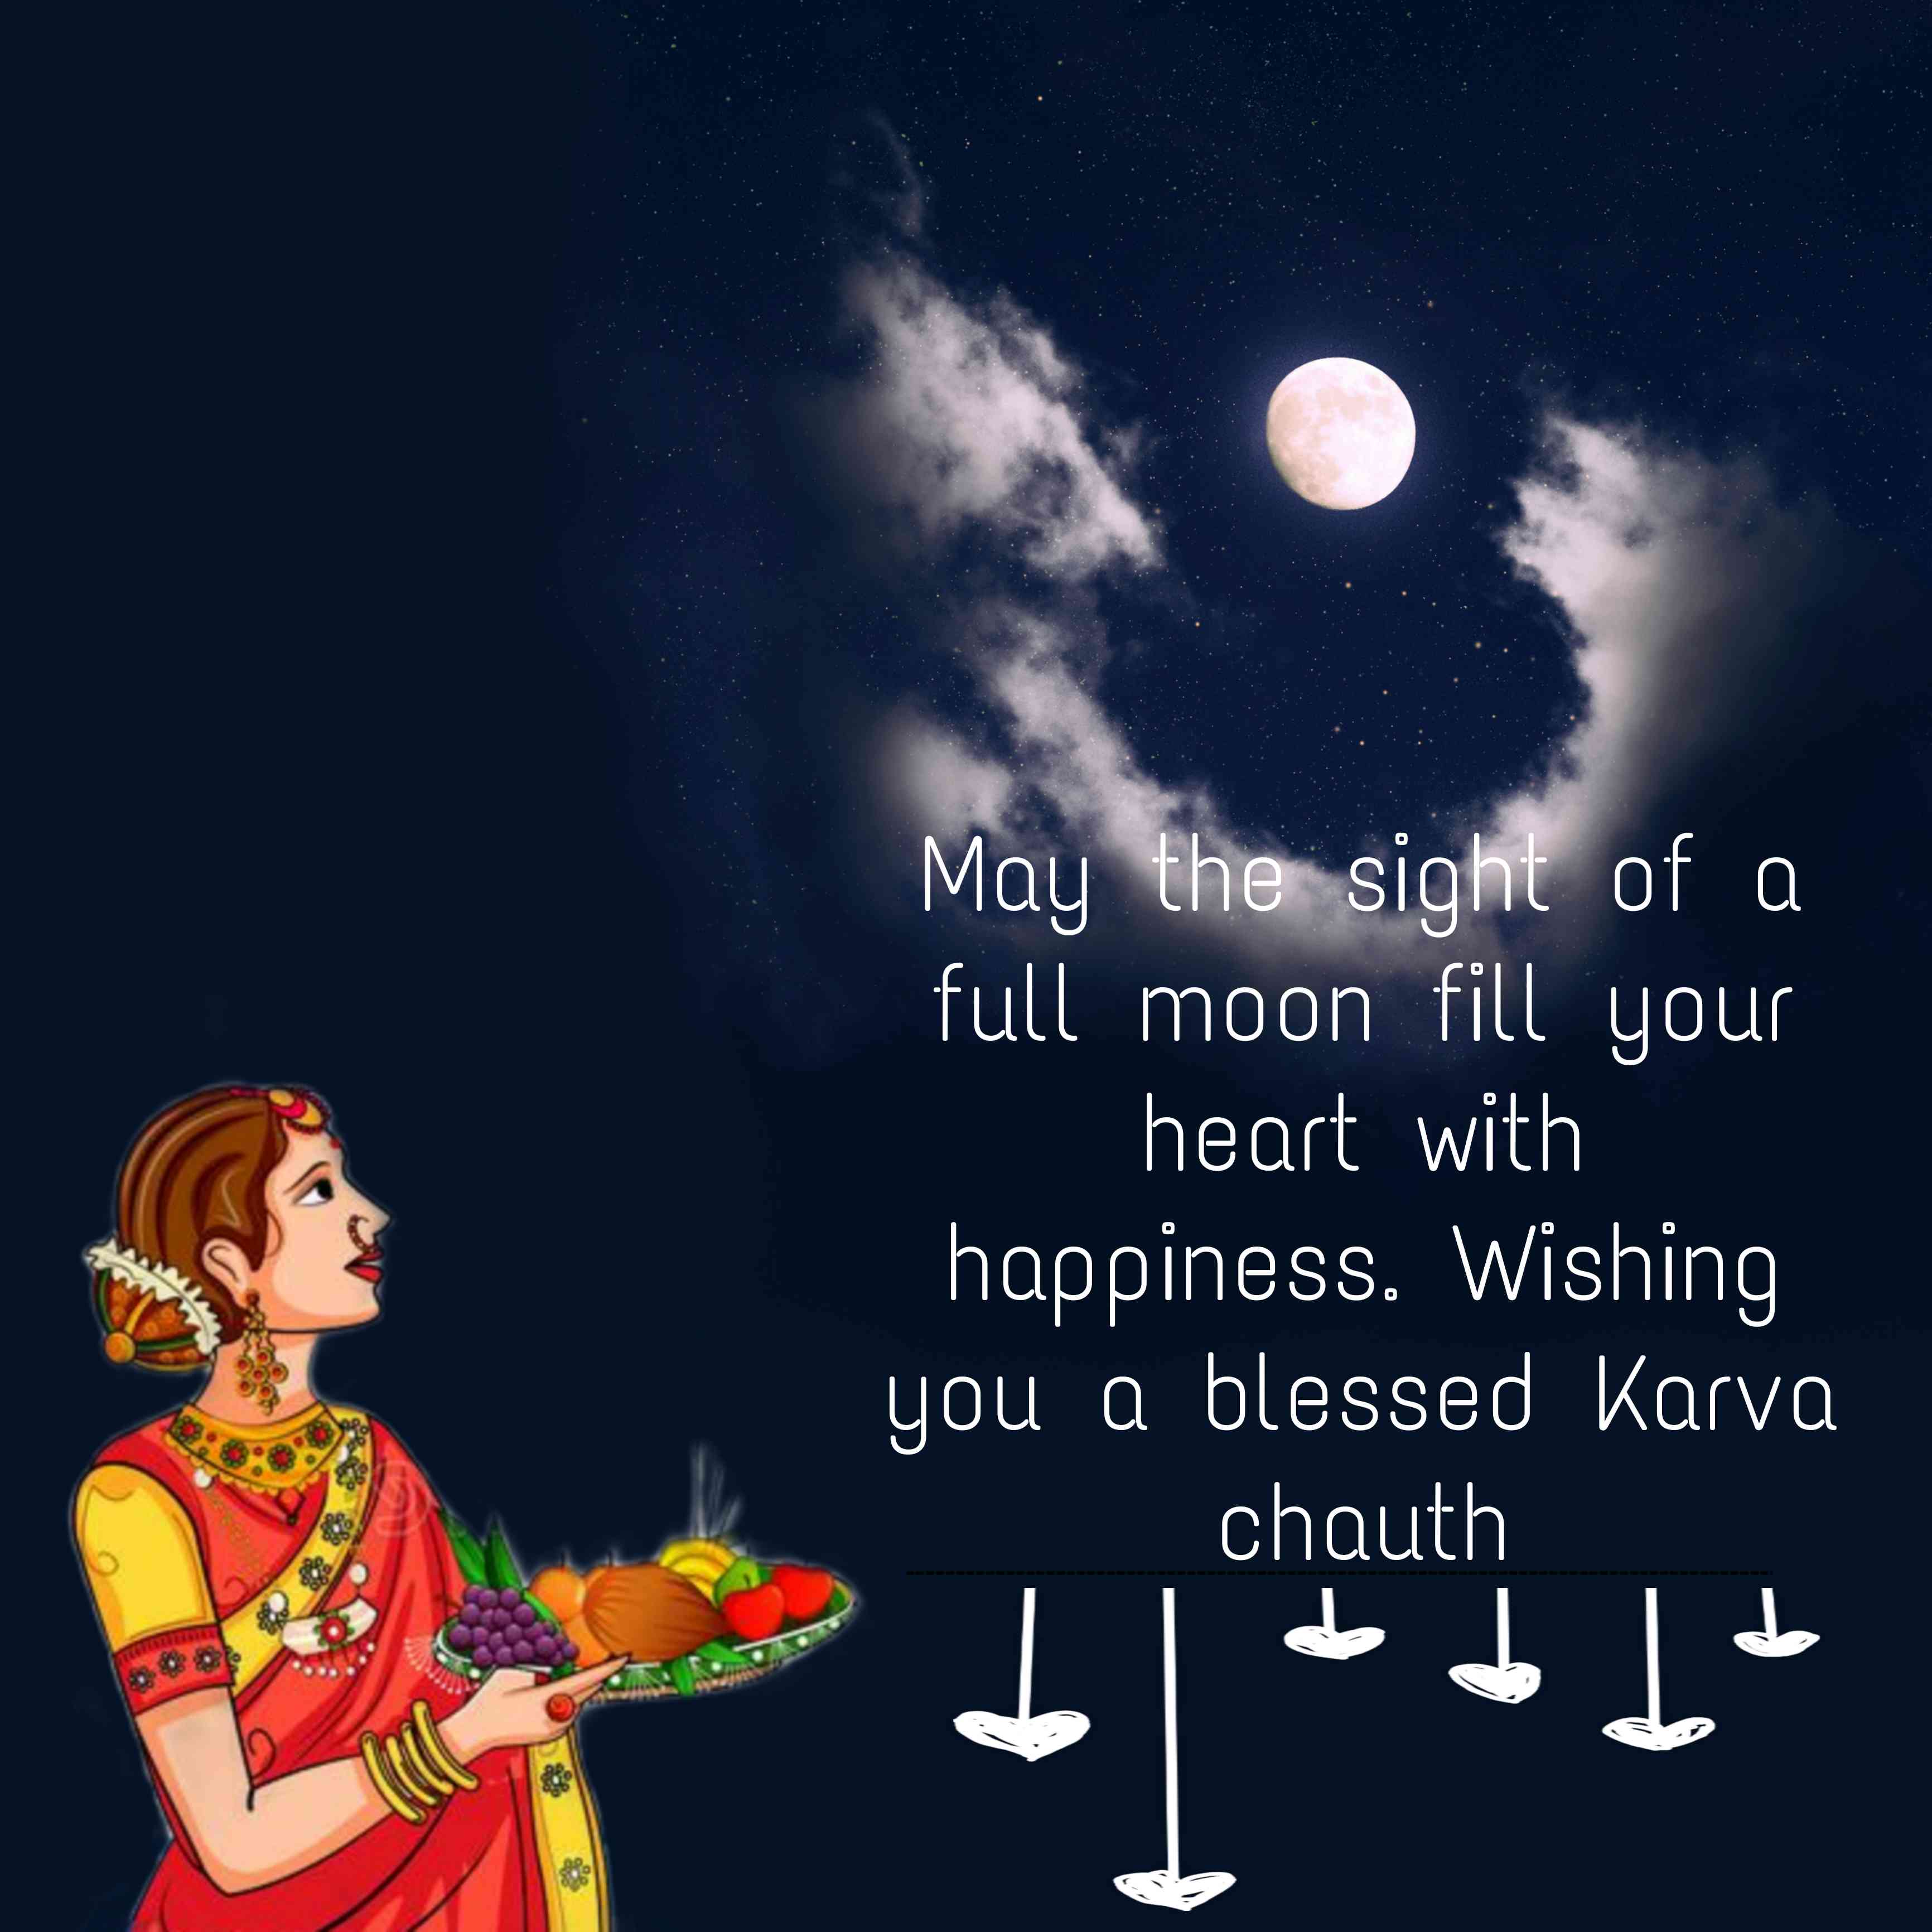 Wishes for Karva Chauth, happy karwa chauth images,  Karva Chauth messages, wishes, status